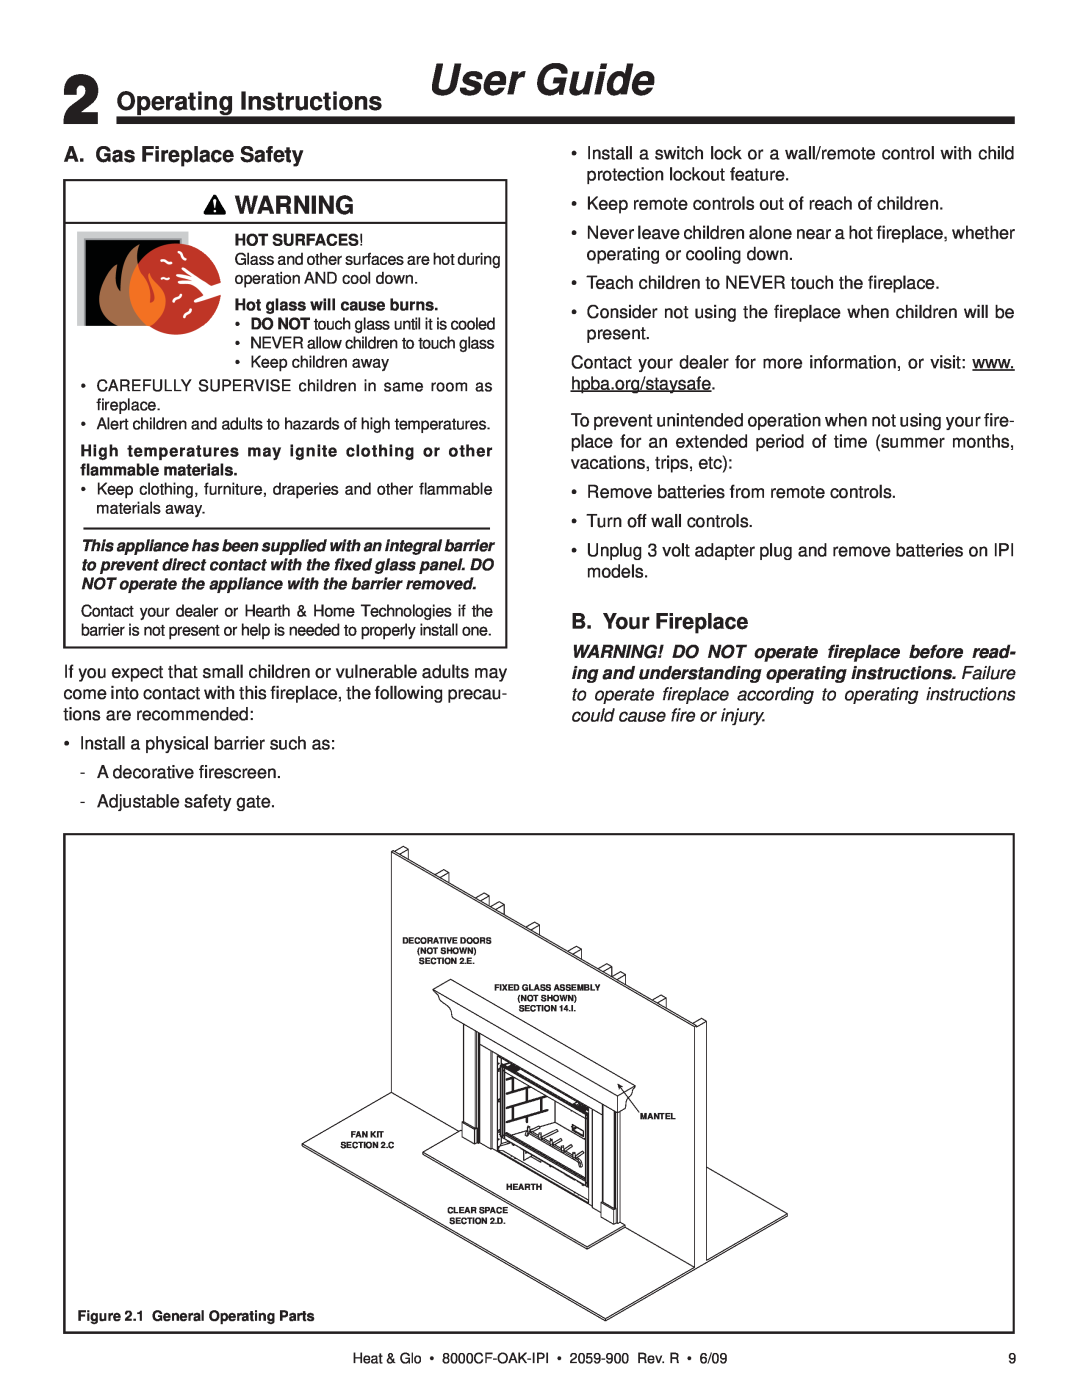 Heat & Glo LifeStyle 8000CF-OAK-IPI Operating Instructions User Guide, A. Gas Fireplace Safety, B. Your Fireplace 